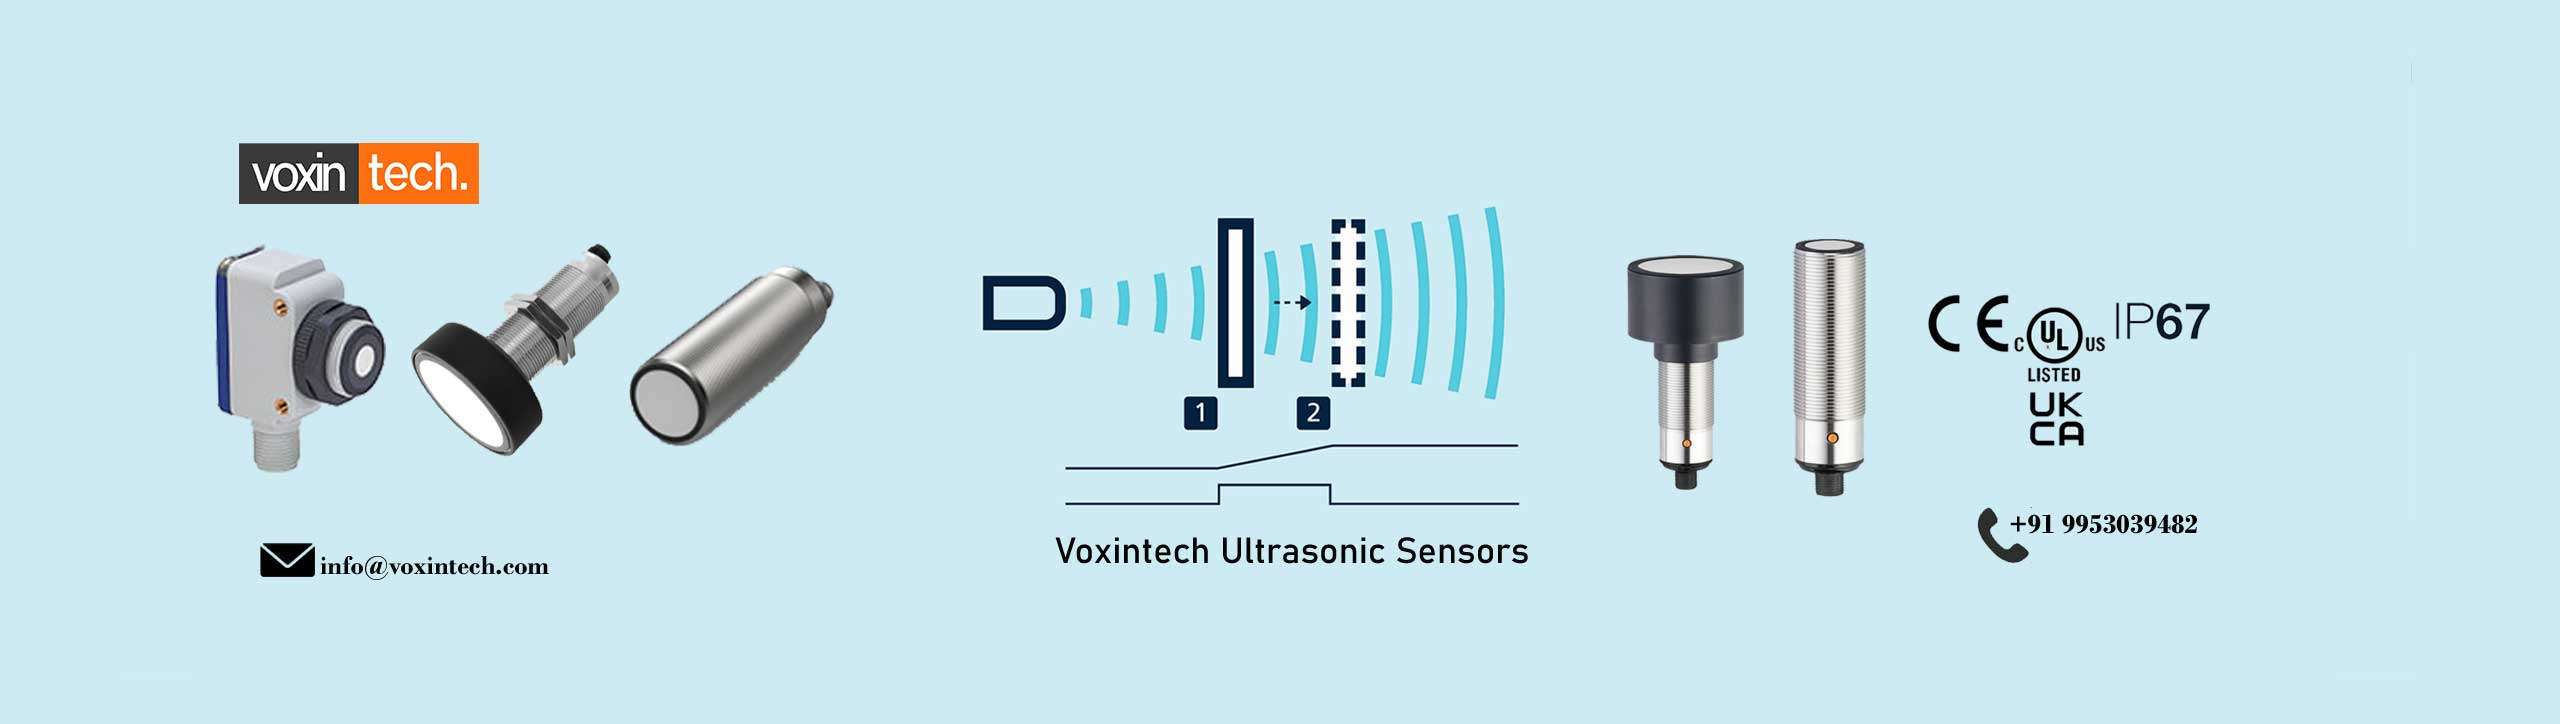 Industrial Ultrasonic Sensors Manufacturer & Supplier , Voxintech Ultrasonic Sensor using Industrial Manufacturing Plants, Stack Height Monitoring with Ultrasonic Sensor, Slack Monitoring with Ultrasonic Sensor, Roll Diameter using Ultrasonic Sensor, Object Detection using Ultrasonic Sensor, Water Level Detection using Ultrasonic Sensor, Object Detection using Ultrasonic Sensor.